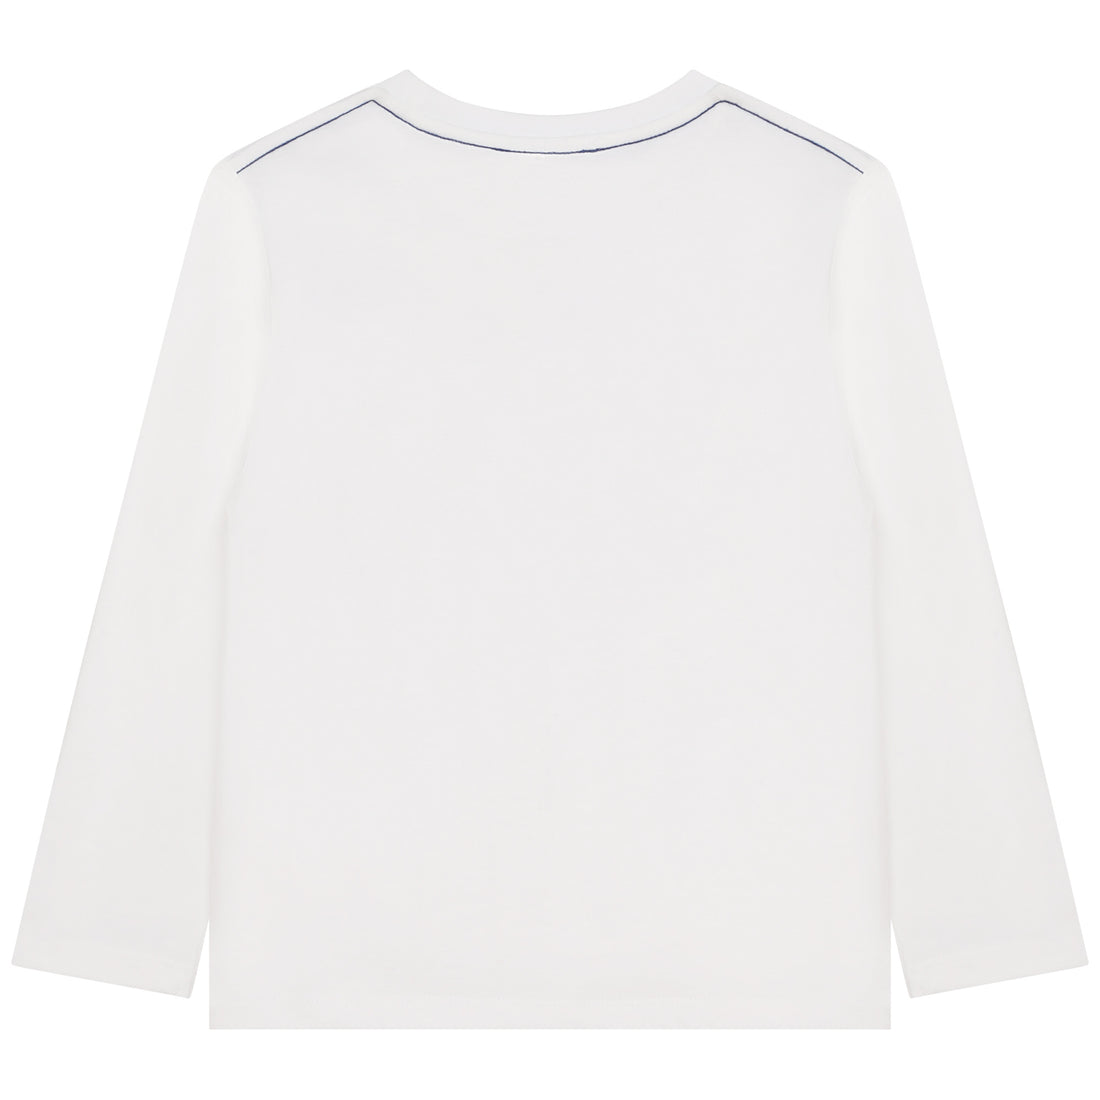 The Marc Jacobs Long Sleeve T-Shirt Style: W25604